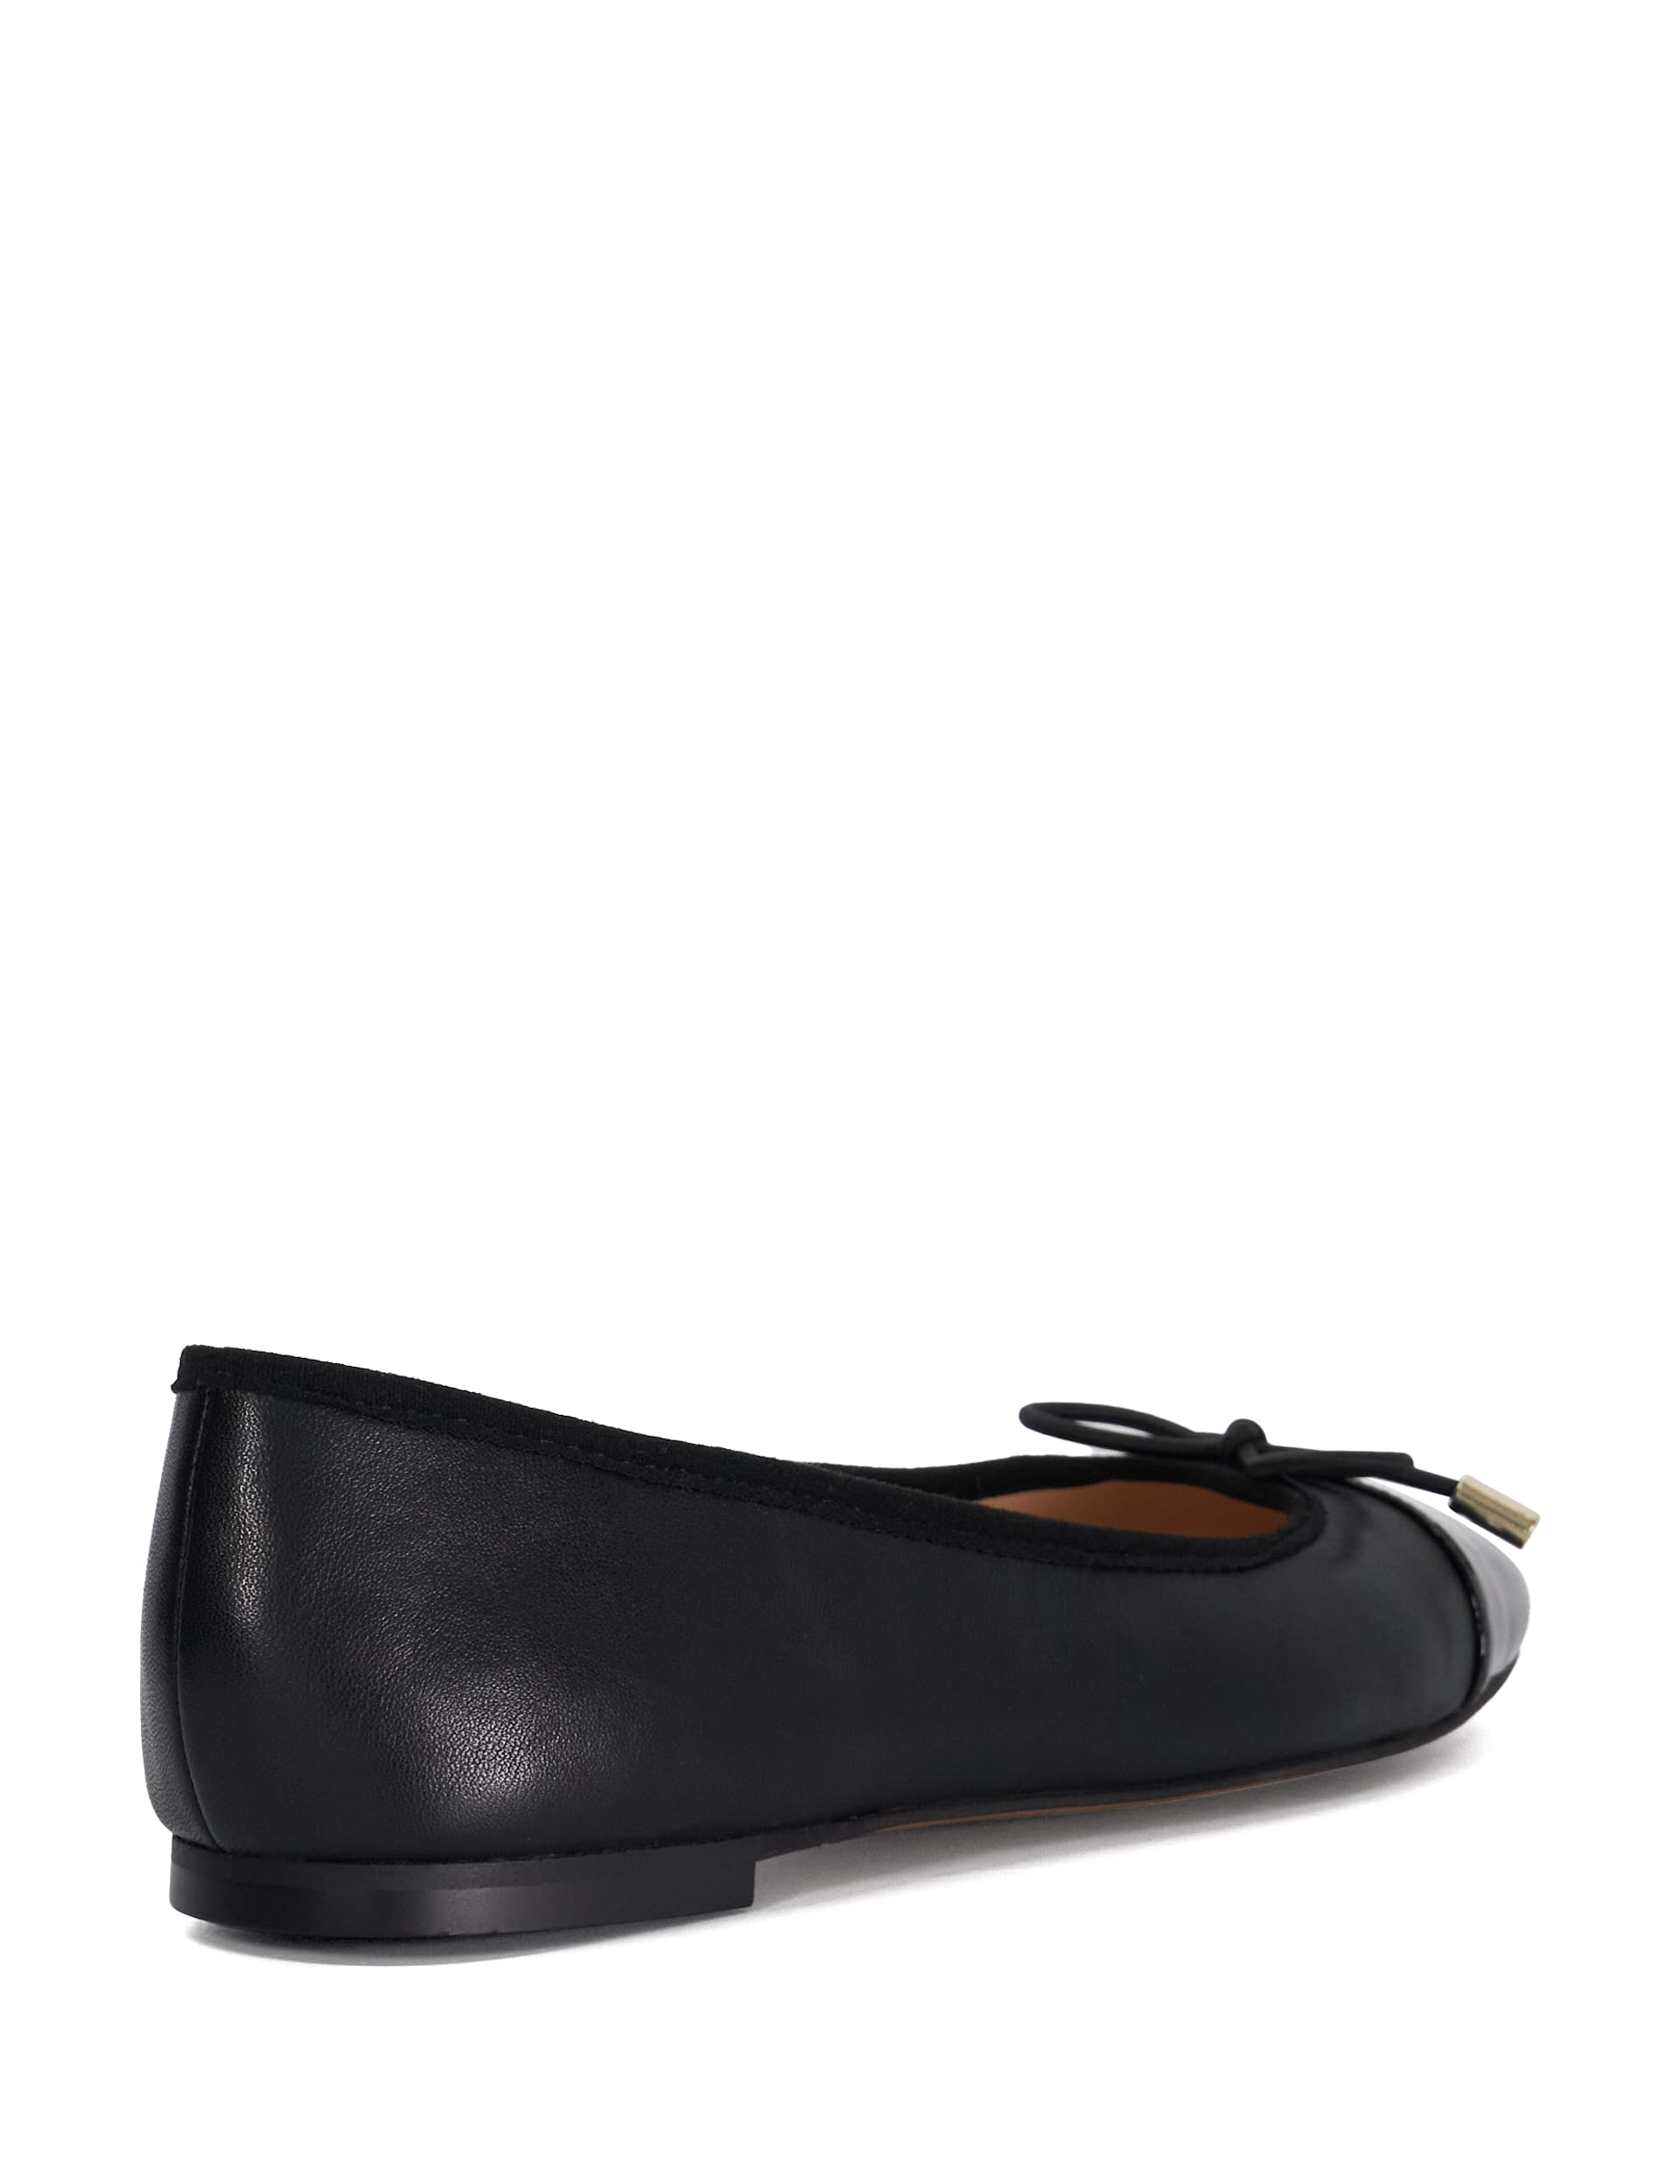 Leather Flat Ballet Pumps 3 of 5